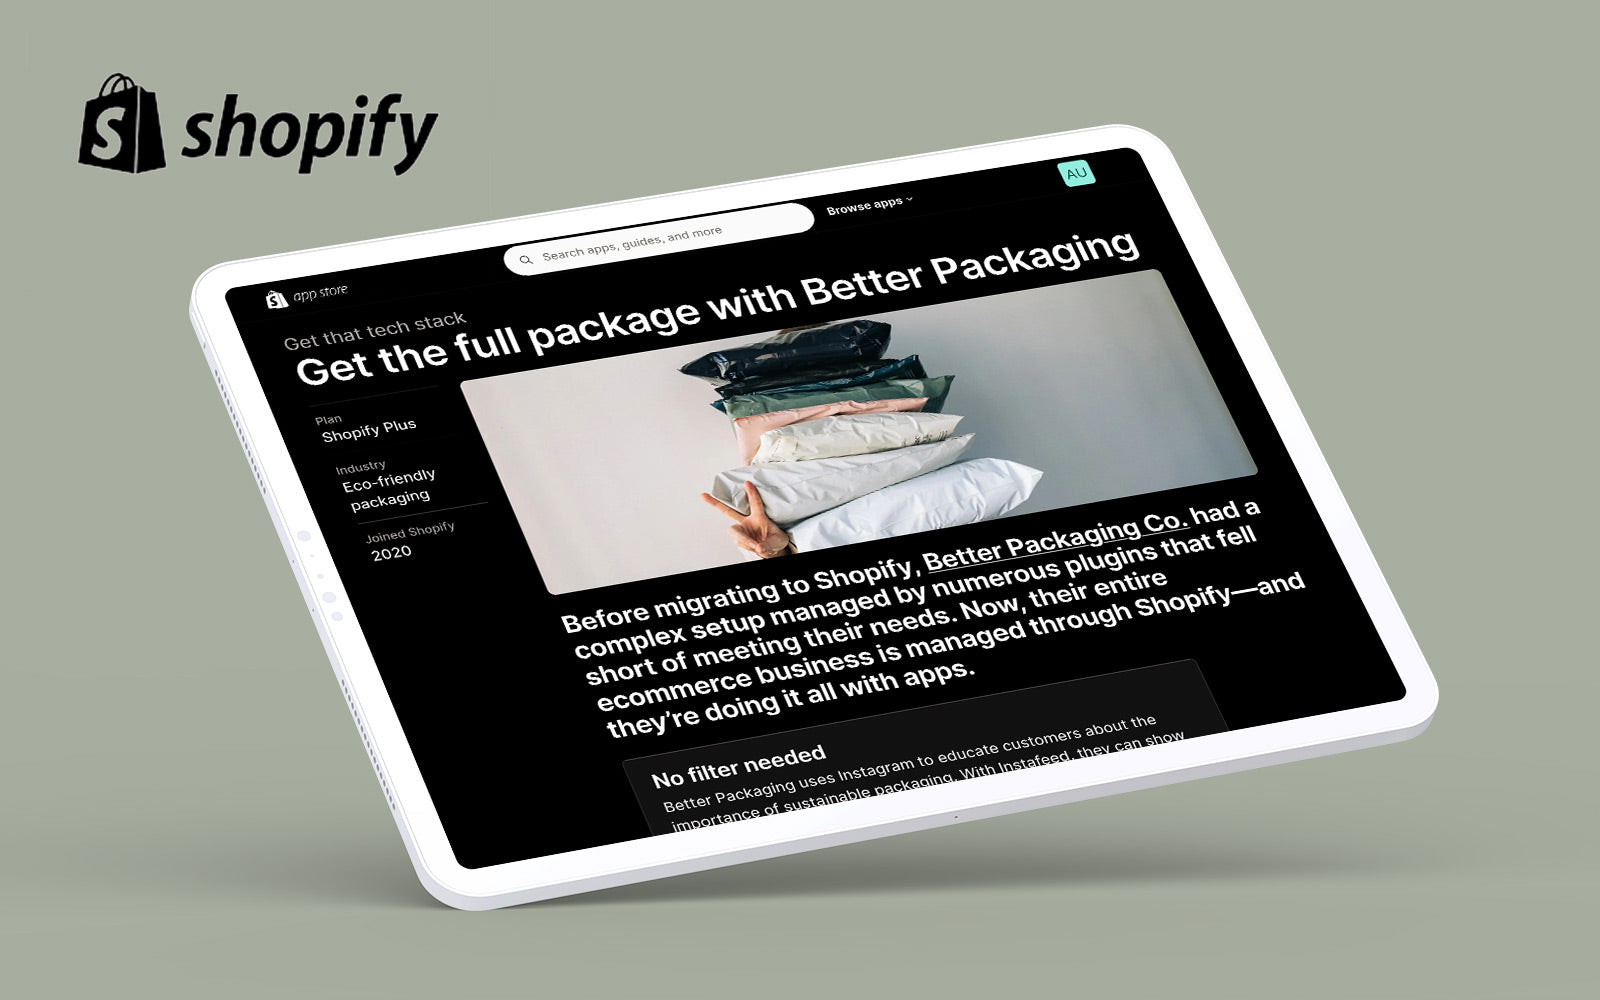 A tablet screen displaying a Shopify blog "Get the full package with Better Packaging"